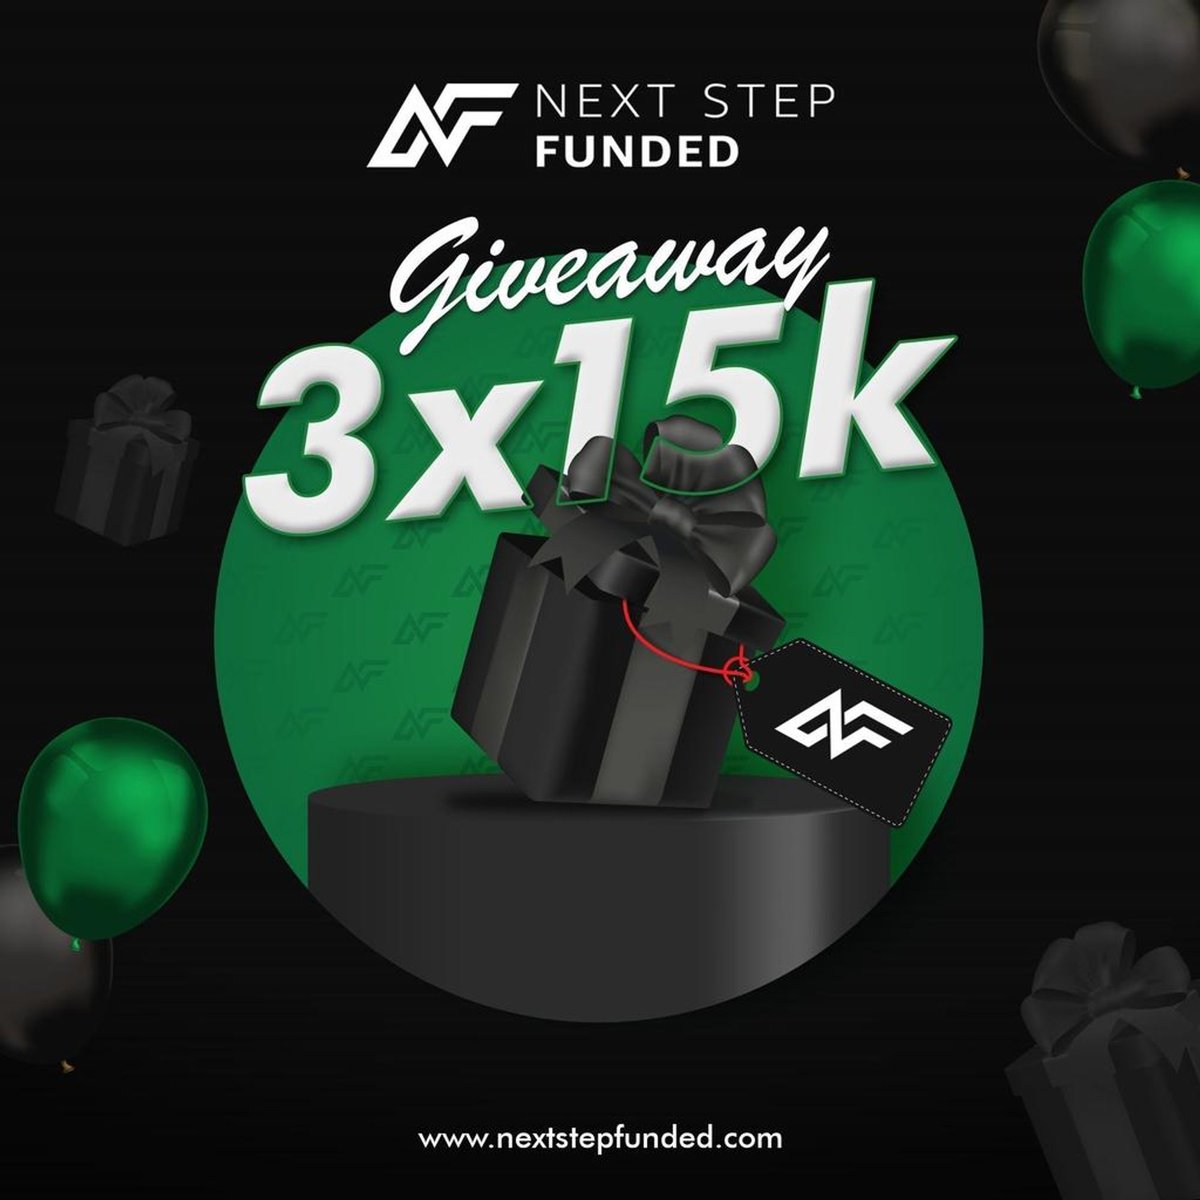 3× 15k Challenge Account 📢📢📢📢📢 Rules to enter👇👇👇 1. Follow @nextstepfunded, @naantifx @fanfundedclub & @Edgetrackerapp Also follow: @mabbafxacademy|| @ShuaibuUbangida|| @dawudfx|| @The_General_Fx 2. Like and retweet 3. Tag 3 traders Winners to be announced in the